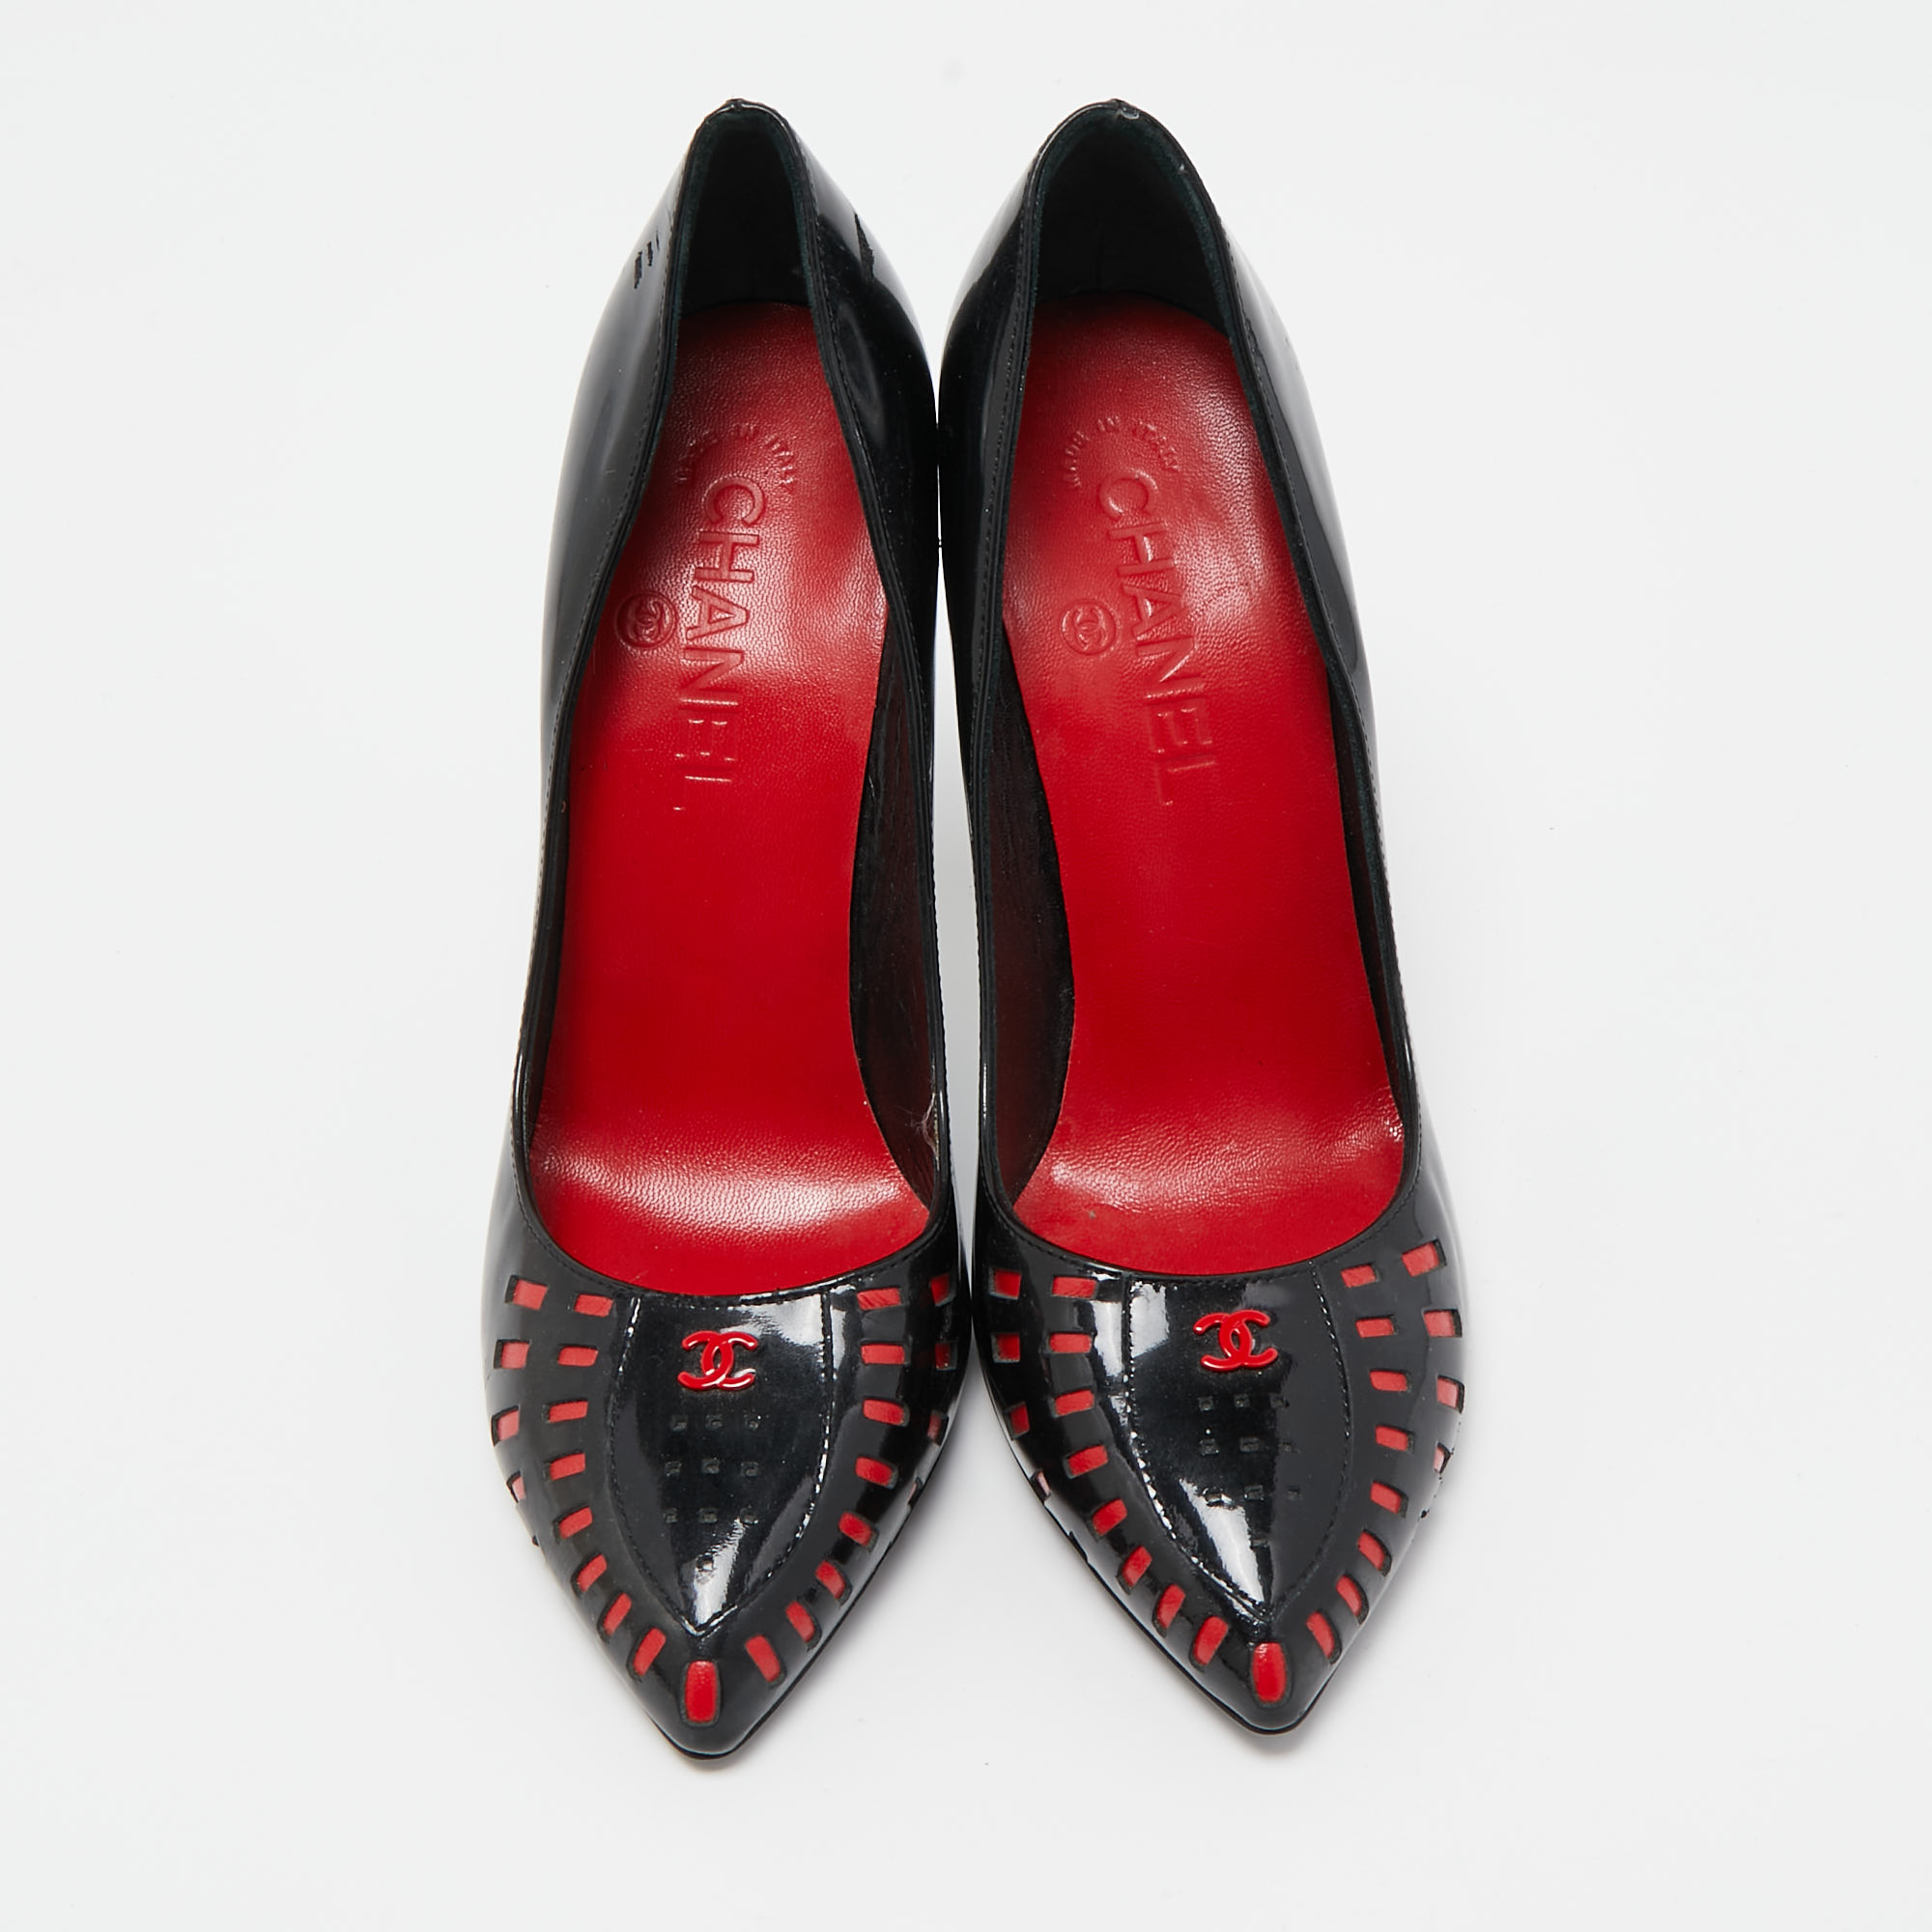 Chanel Black/Red Patent Pointed Toe Pumps Size 38